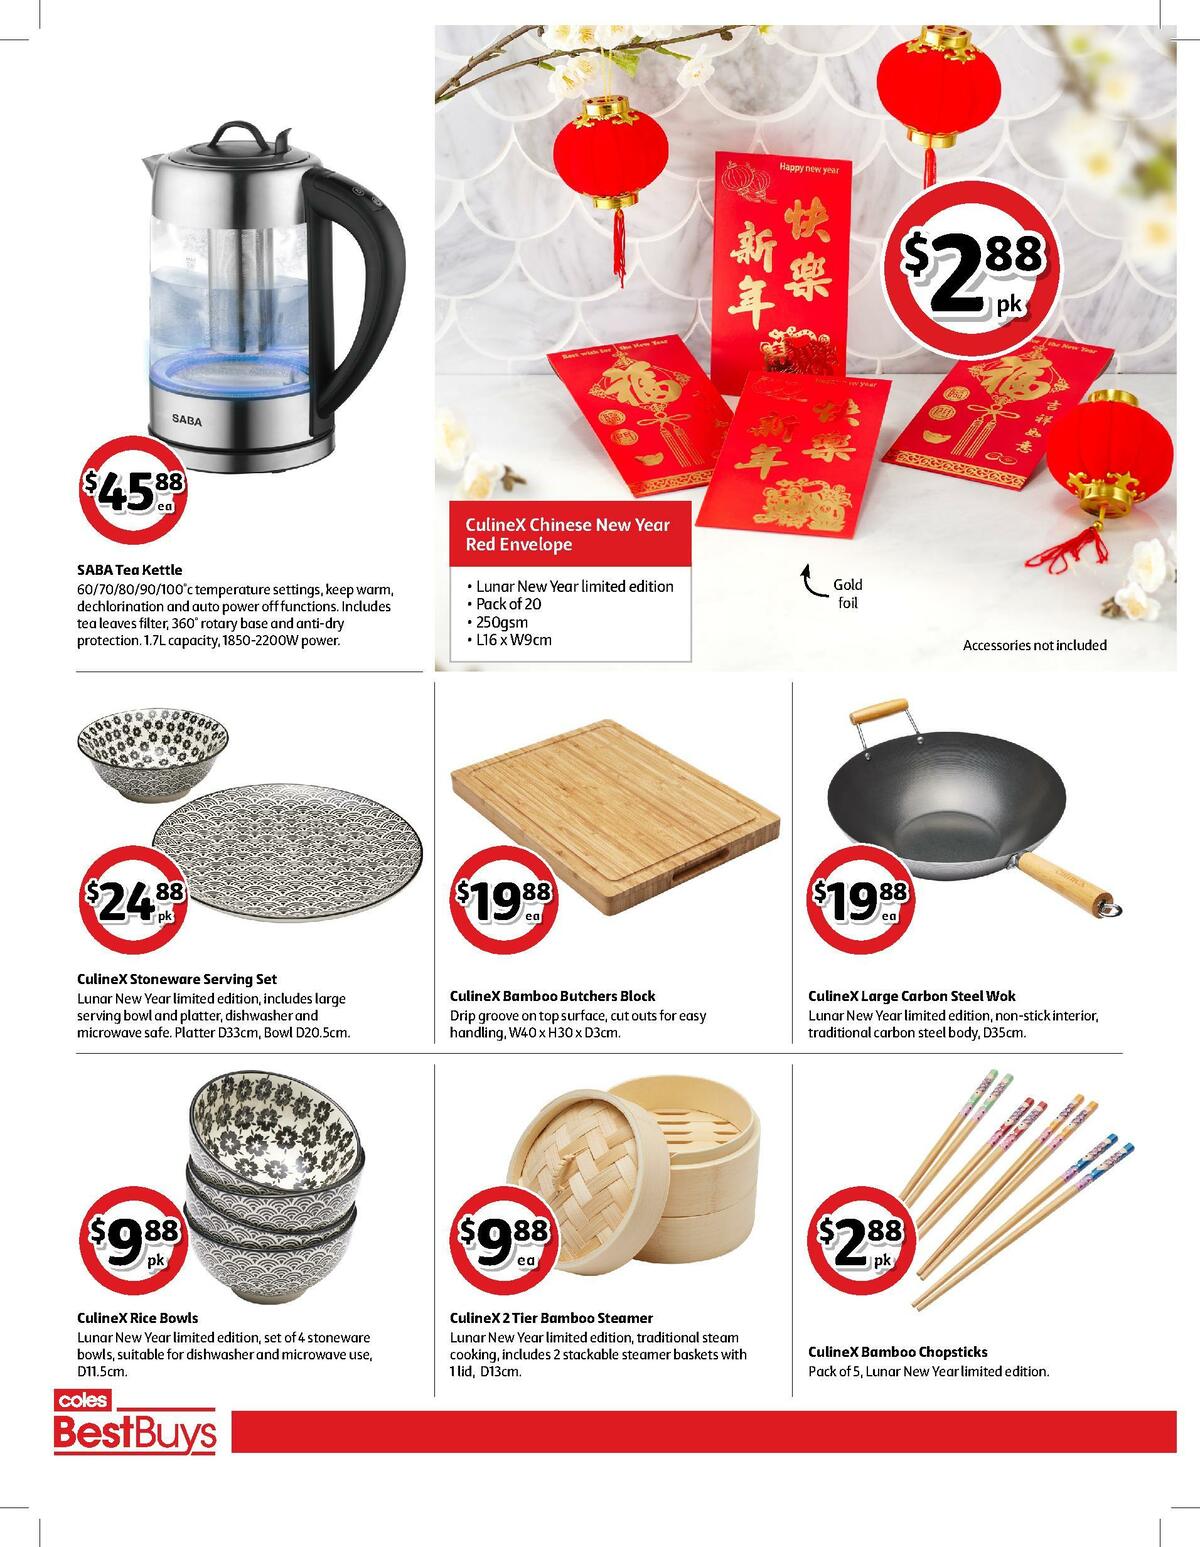 Coles Best Buys - Lunar New Year Catalogues from 21 January